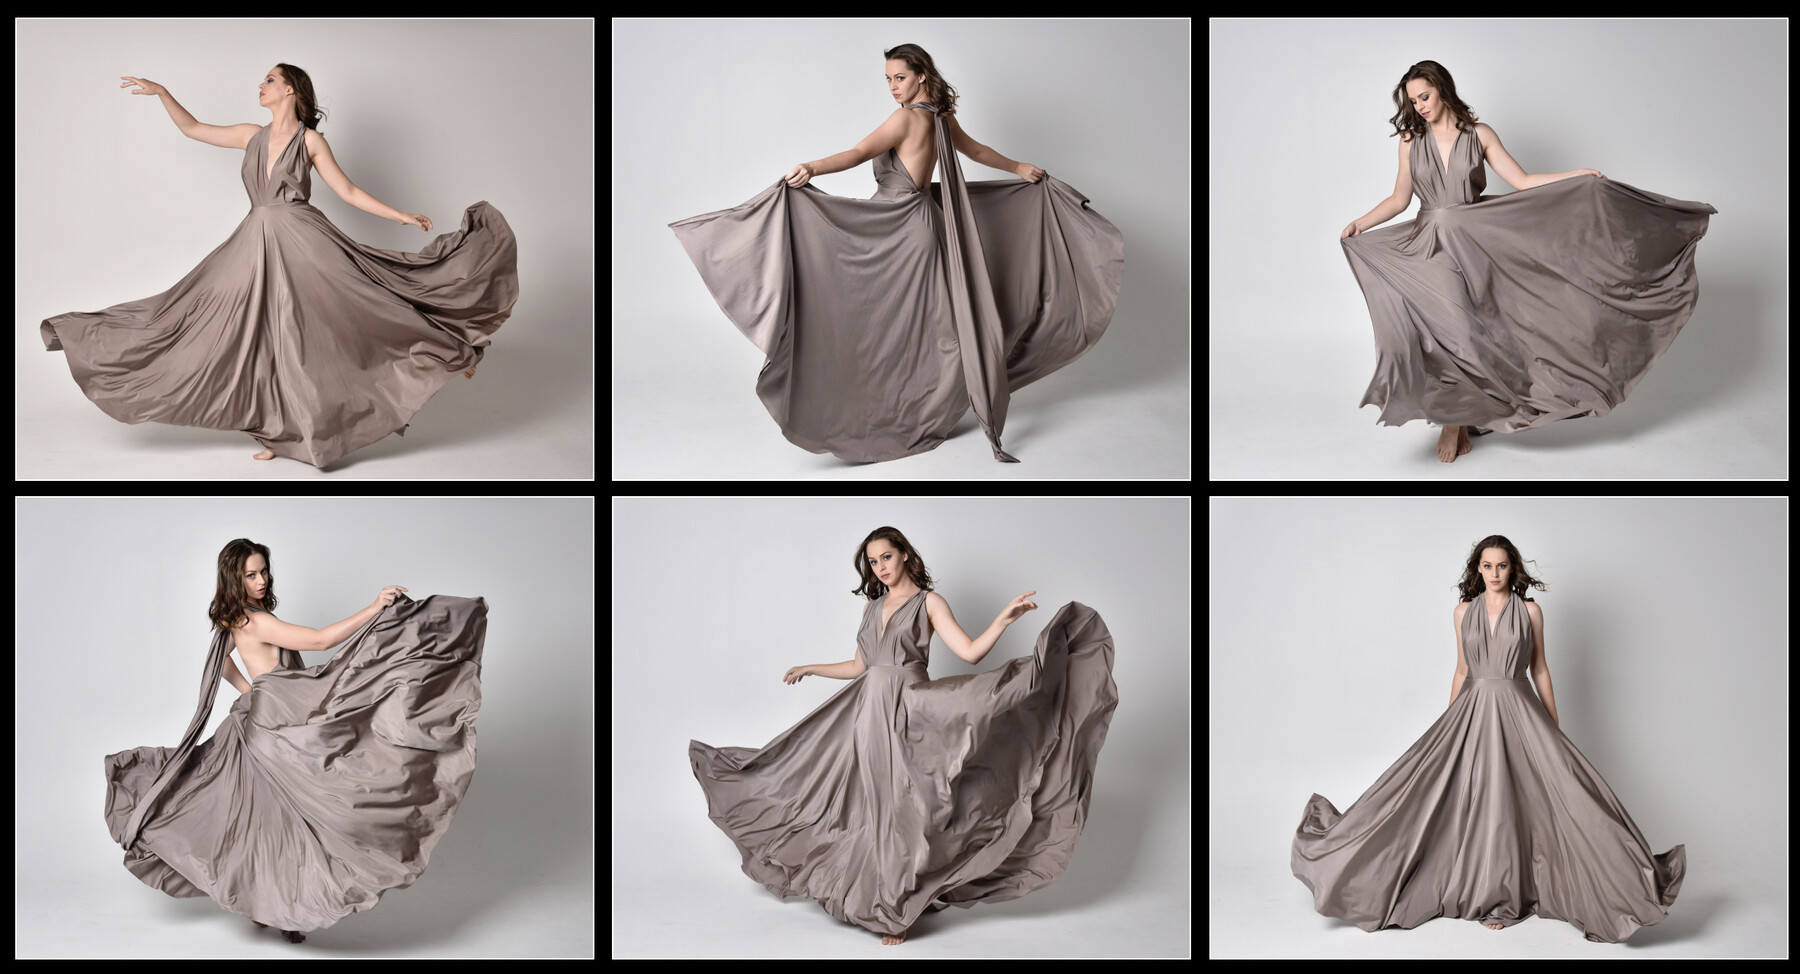 Ball gown poses. | Ball gowns, Poses, Gowns